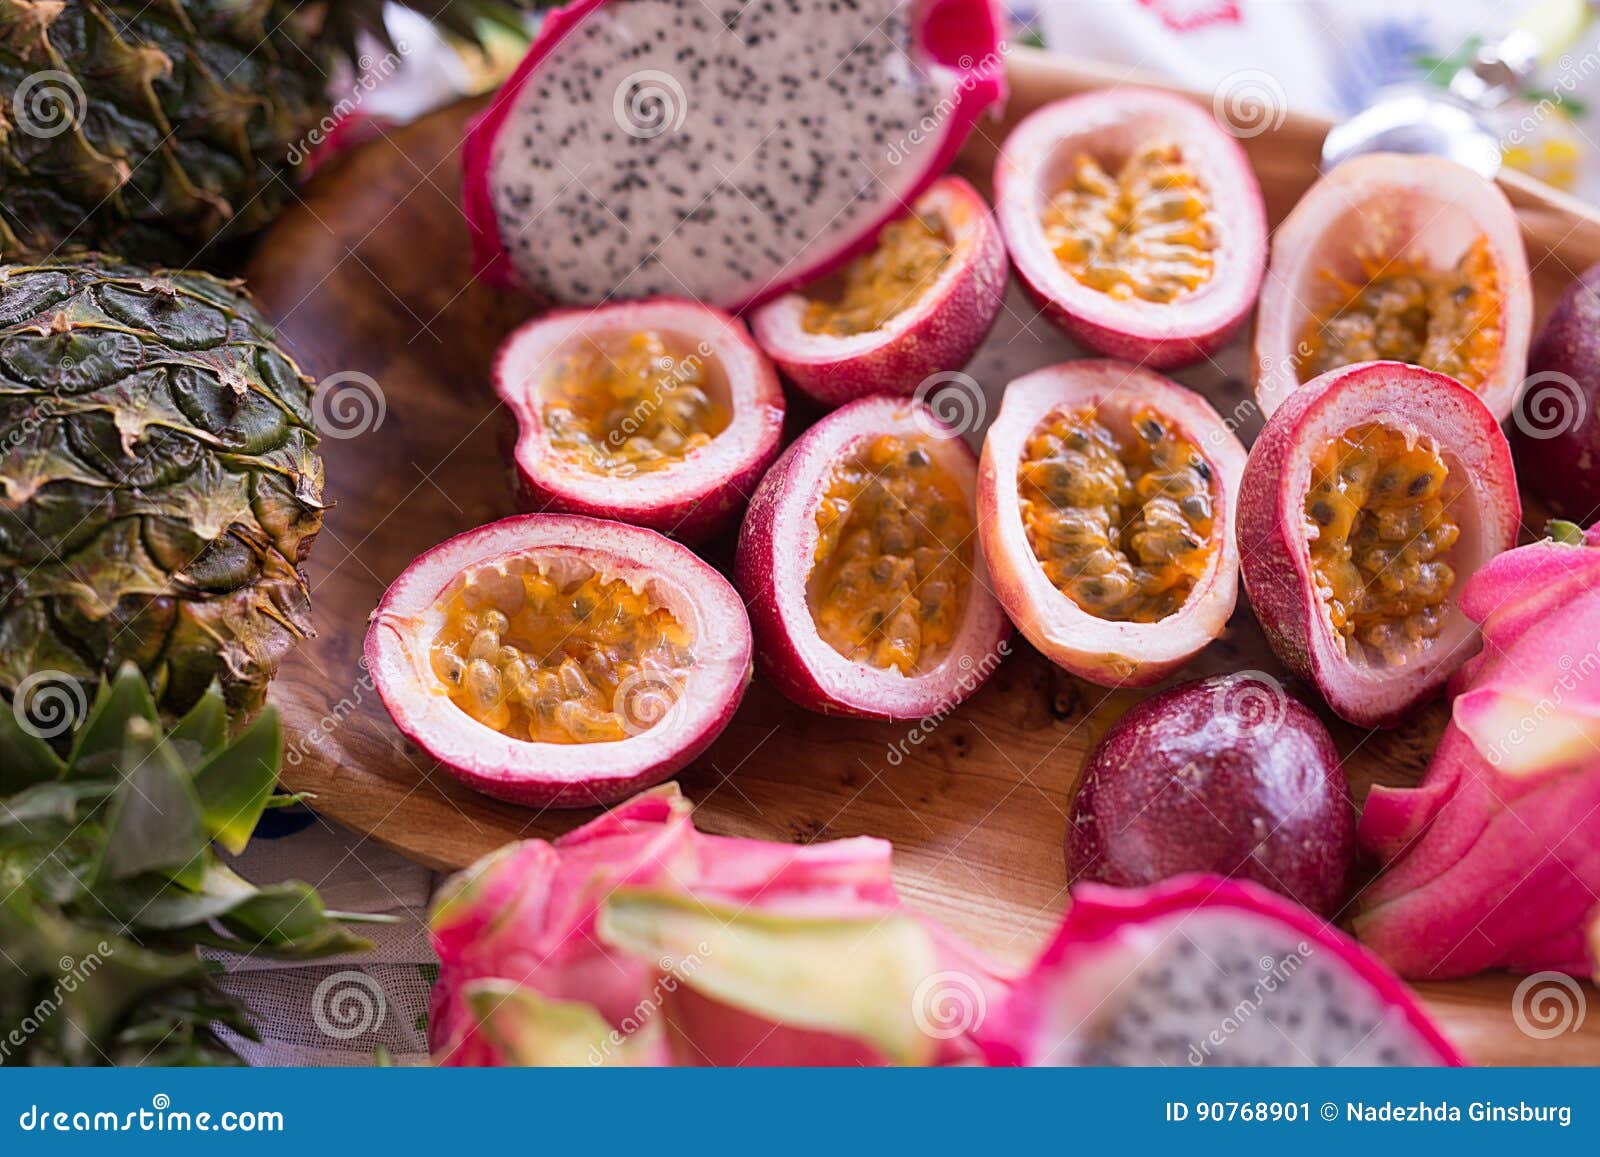 exotic fruits of thailand, bright, delicious, passion fruit